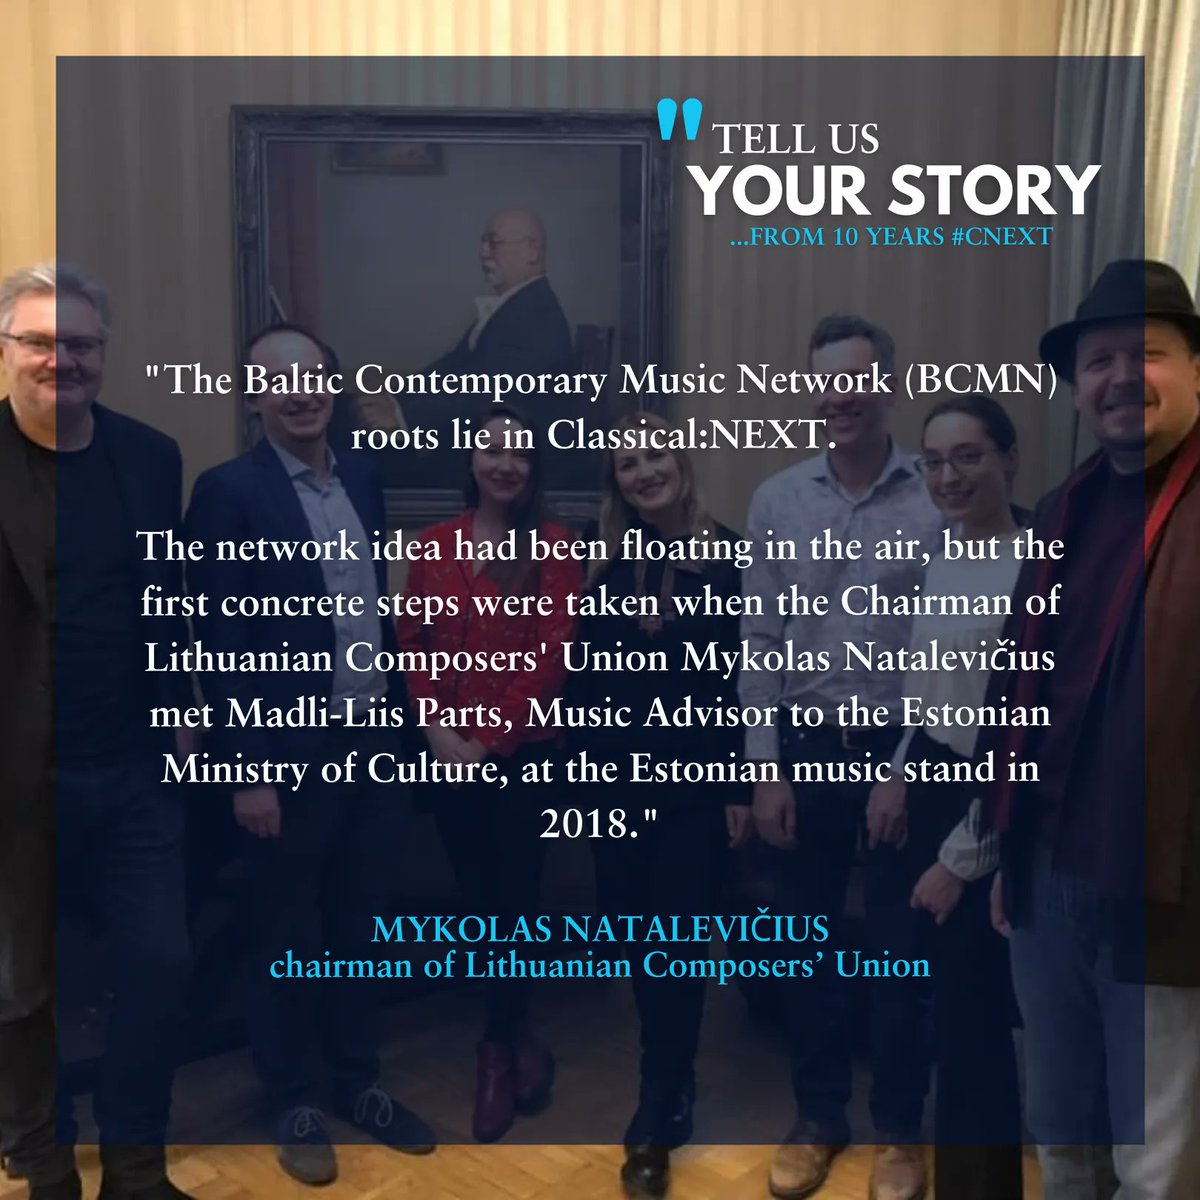 Only 5 days left until #cnext22 and here comes the second round of 'Tell Us Your Story ...from 10 Years #CNEXT' this time by: Brendan Jan Walsh & Baltic Contemporary Music Network #NEXT10years 🎼 See you at Classical:NEXT 2022